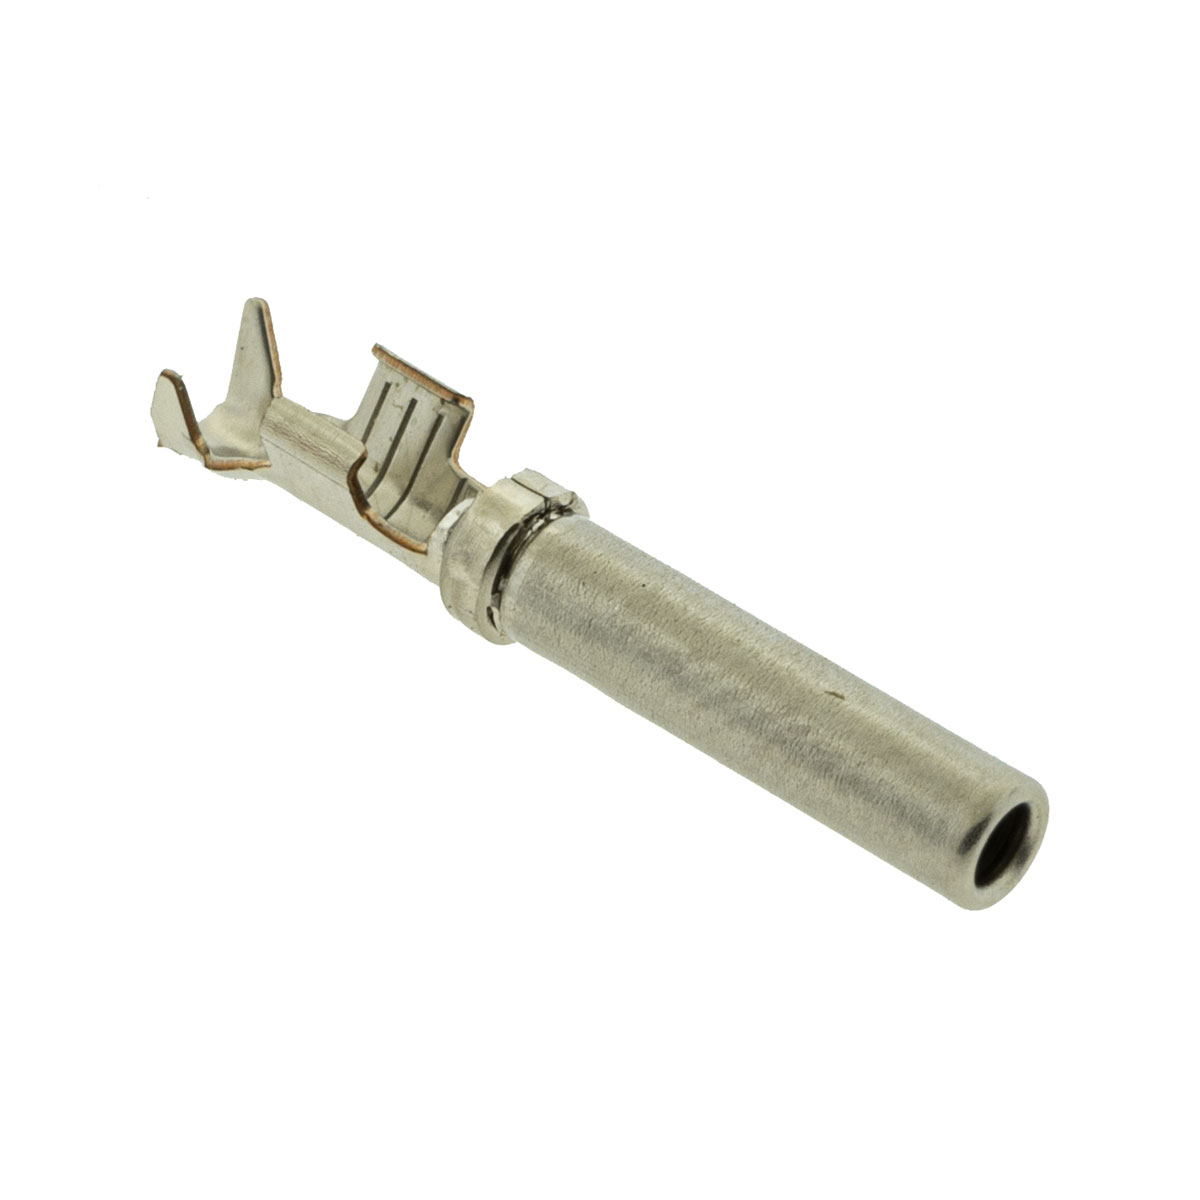 AT62-16-0622 - Amphenol Size 16 Nickel Plated Stamped Socket